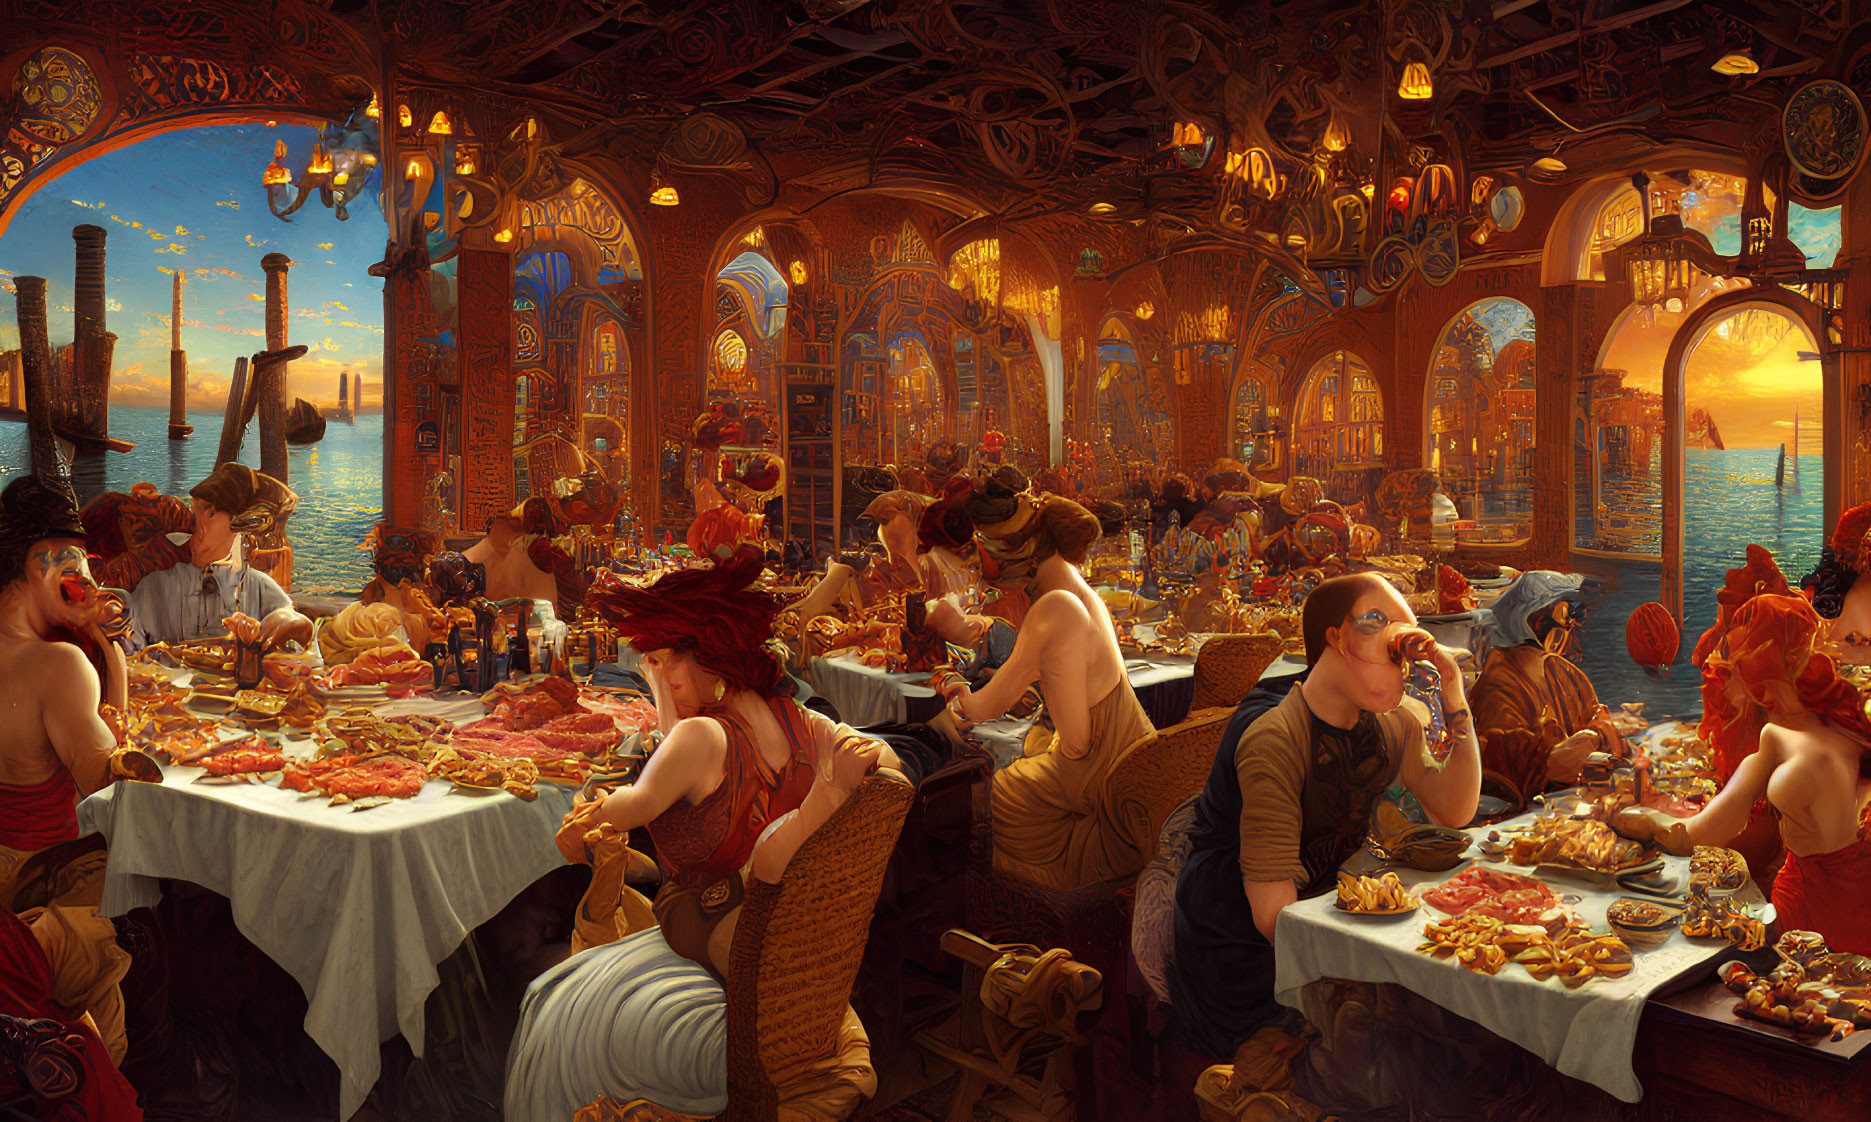 Opulent banquet scene in ornate hall with people in red tones dining and conversing under warm lighting